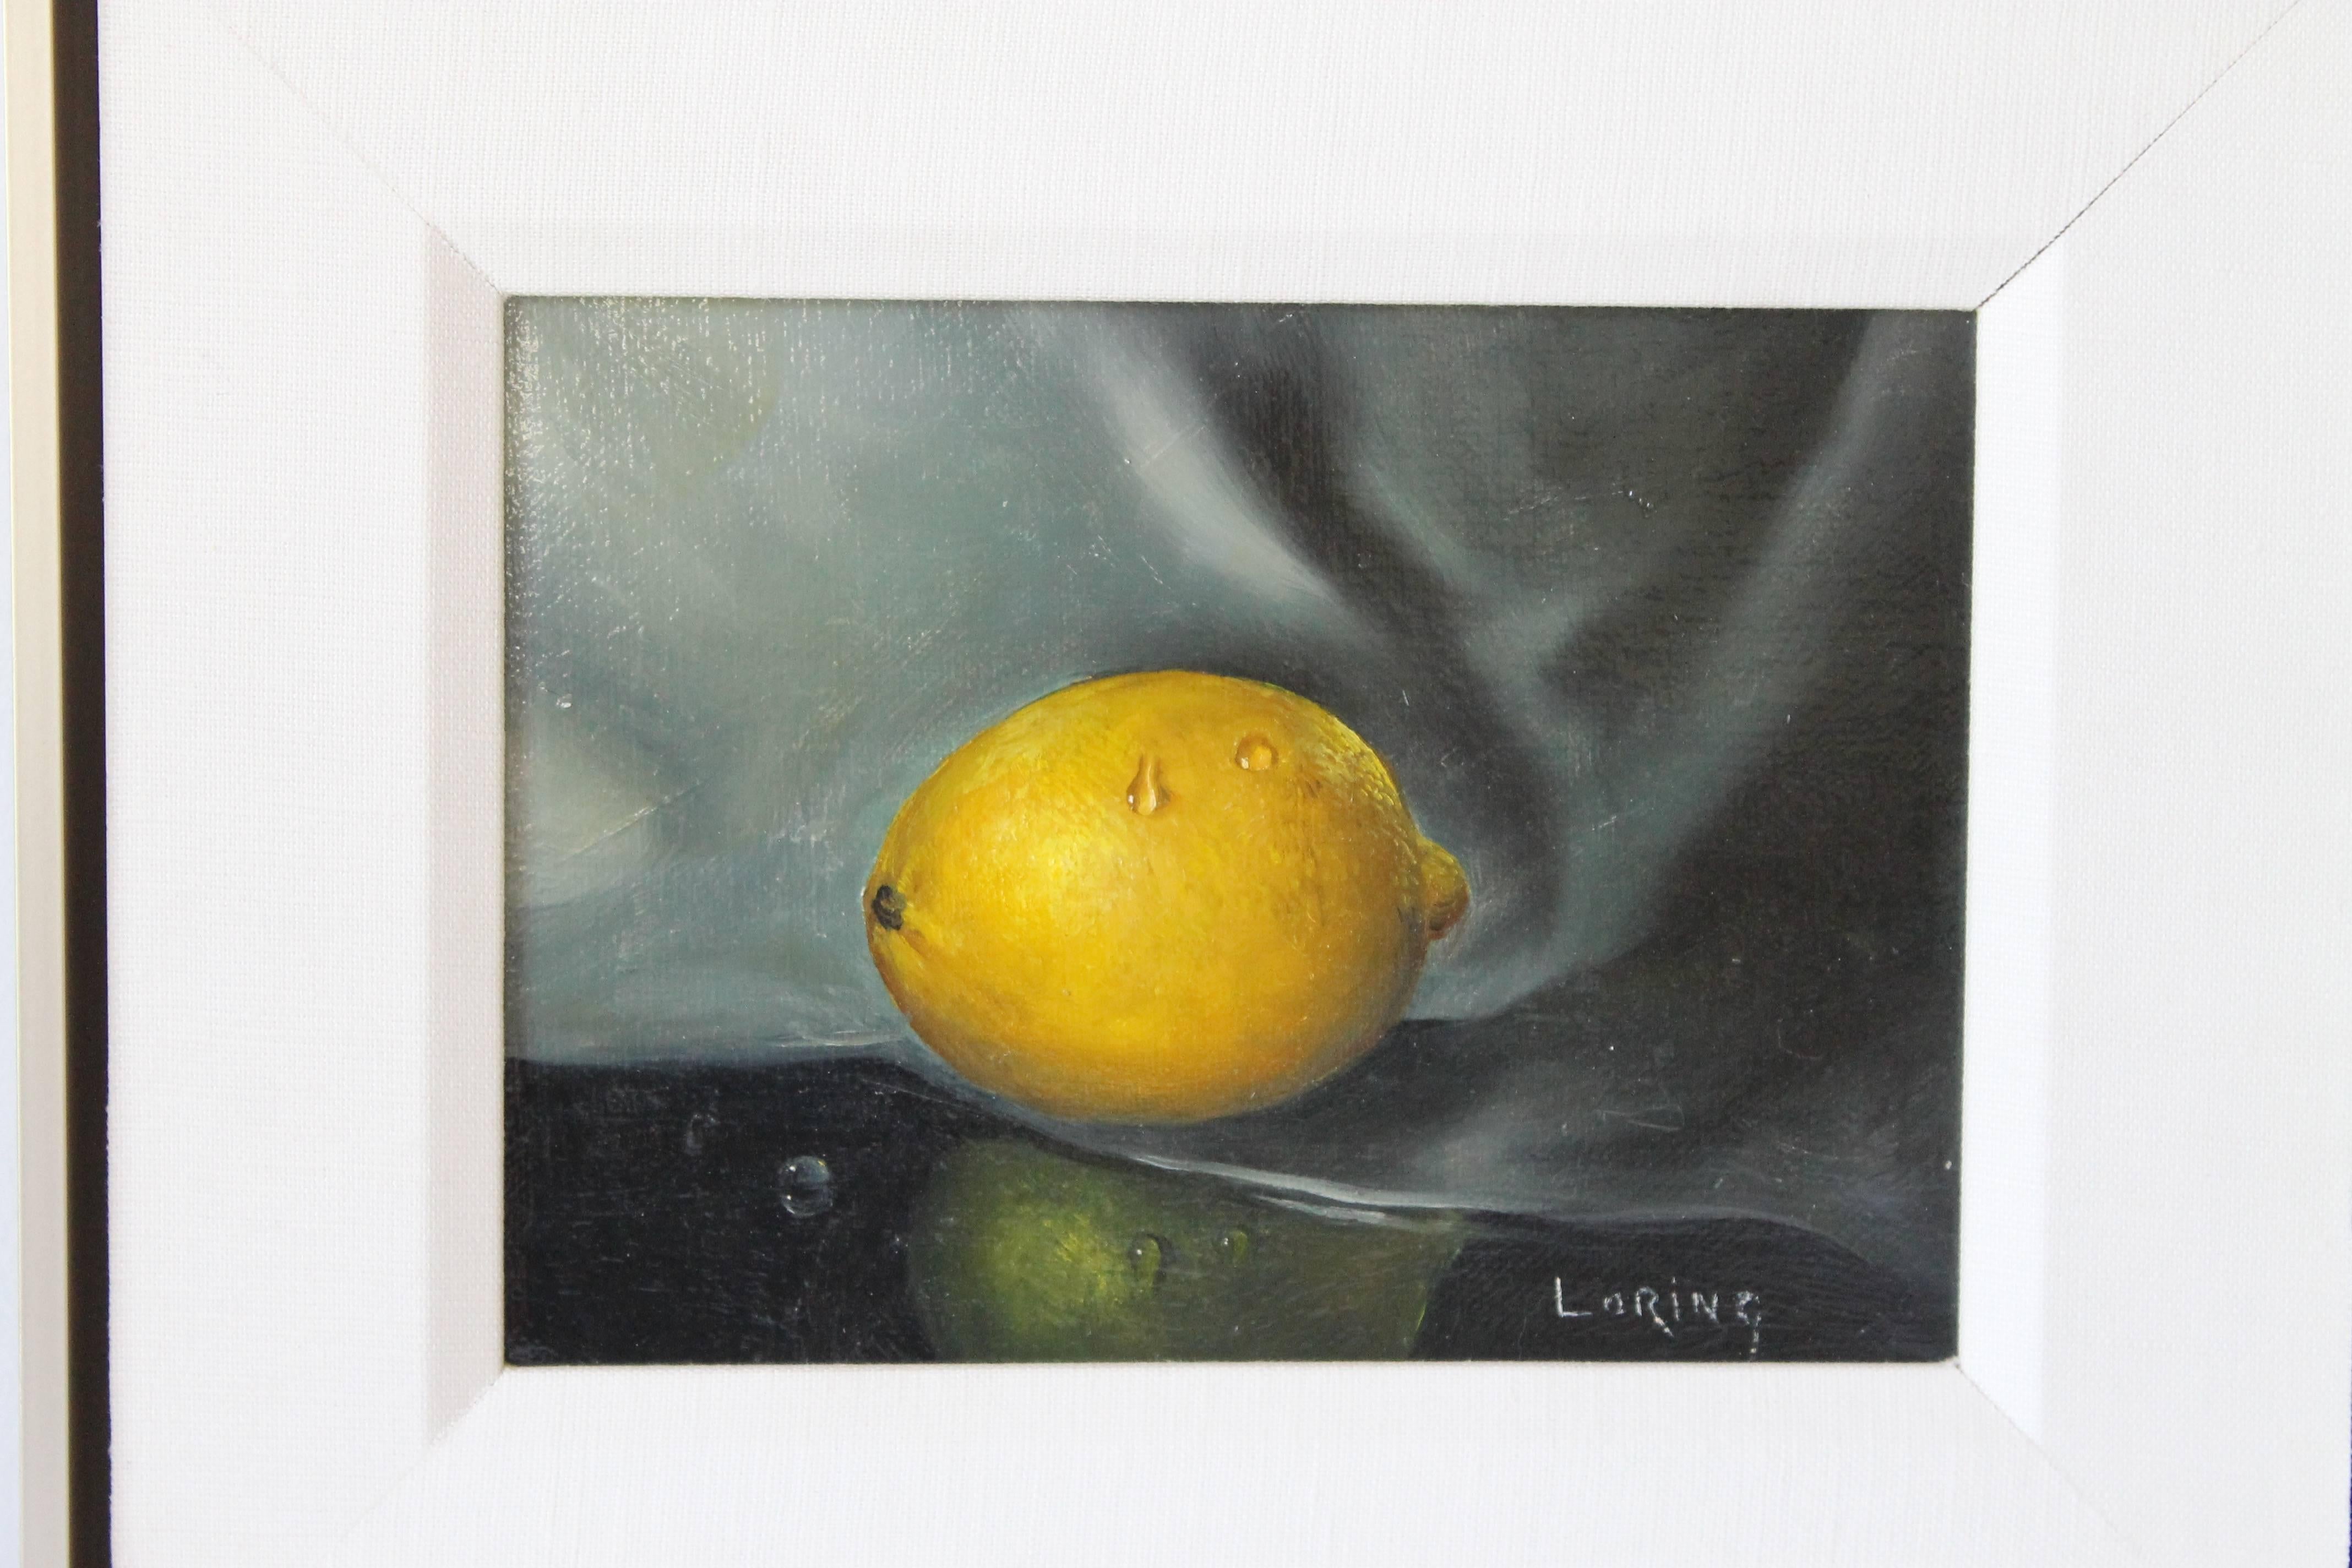 Oil painting of a lemon signed 